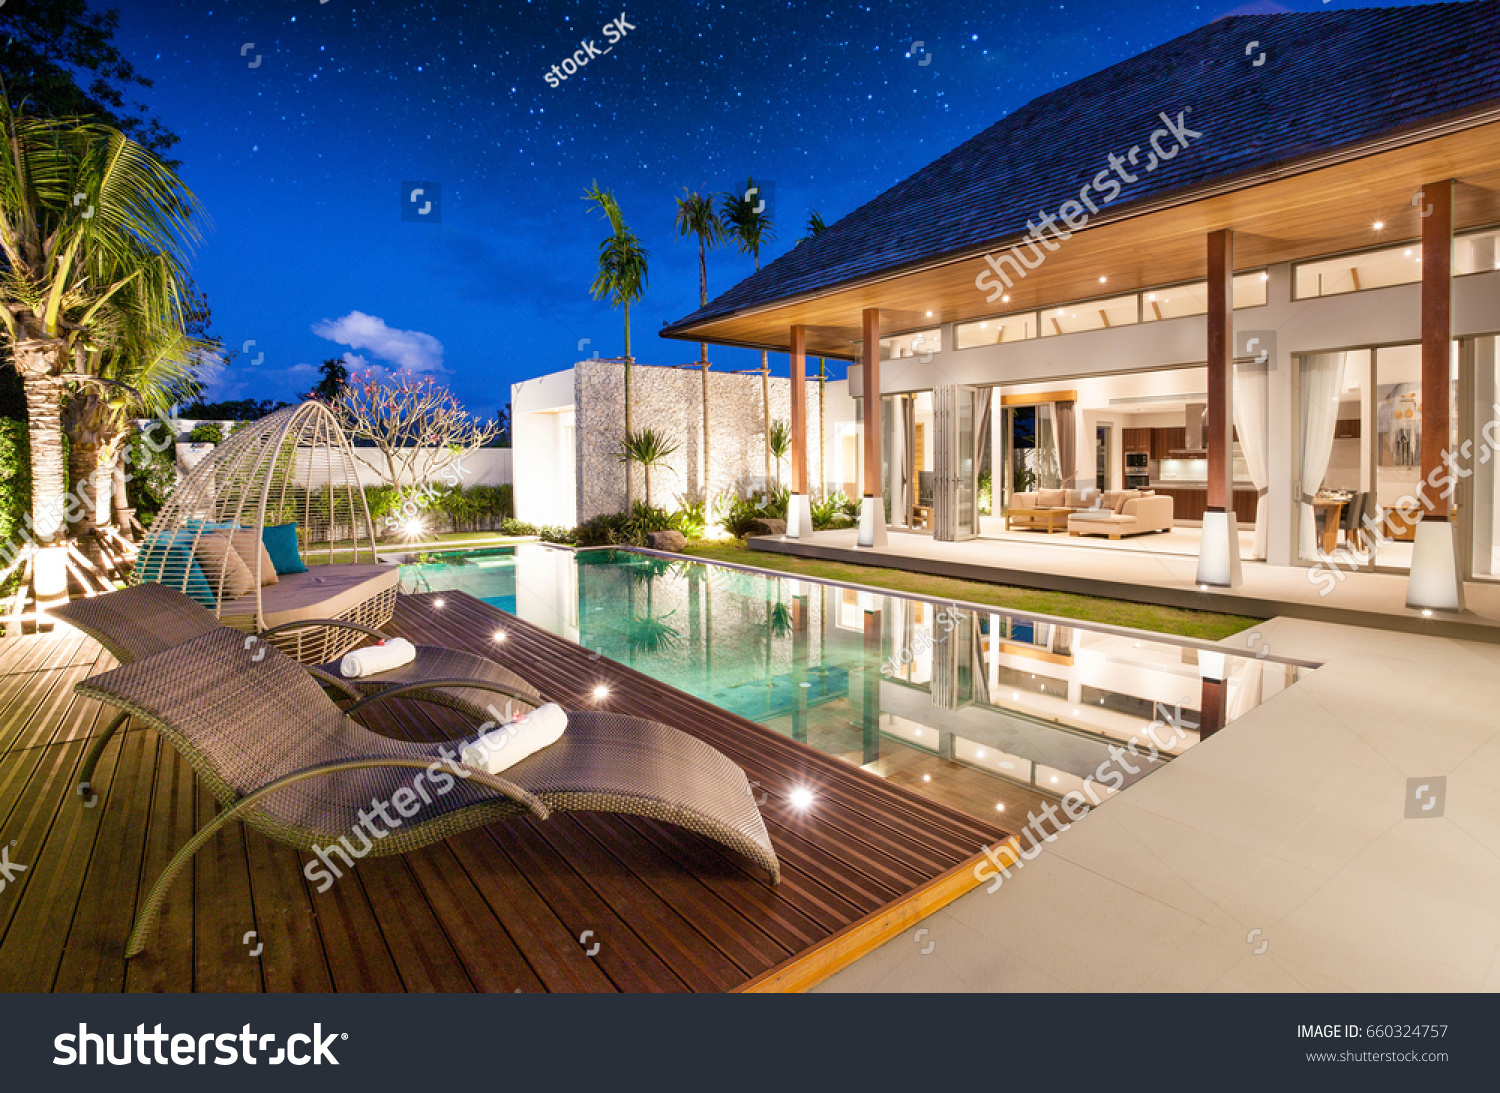 real estate Luxury Interior and exterior design  pool villa with living room  at  night sky  home, house ,sun bed ,sofa #660324757